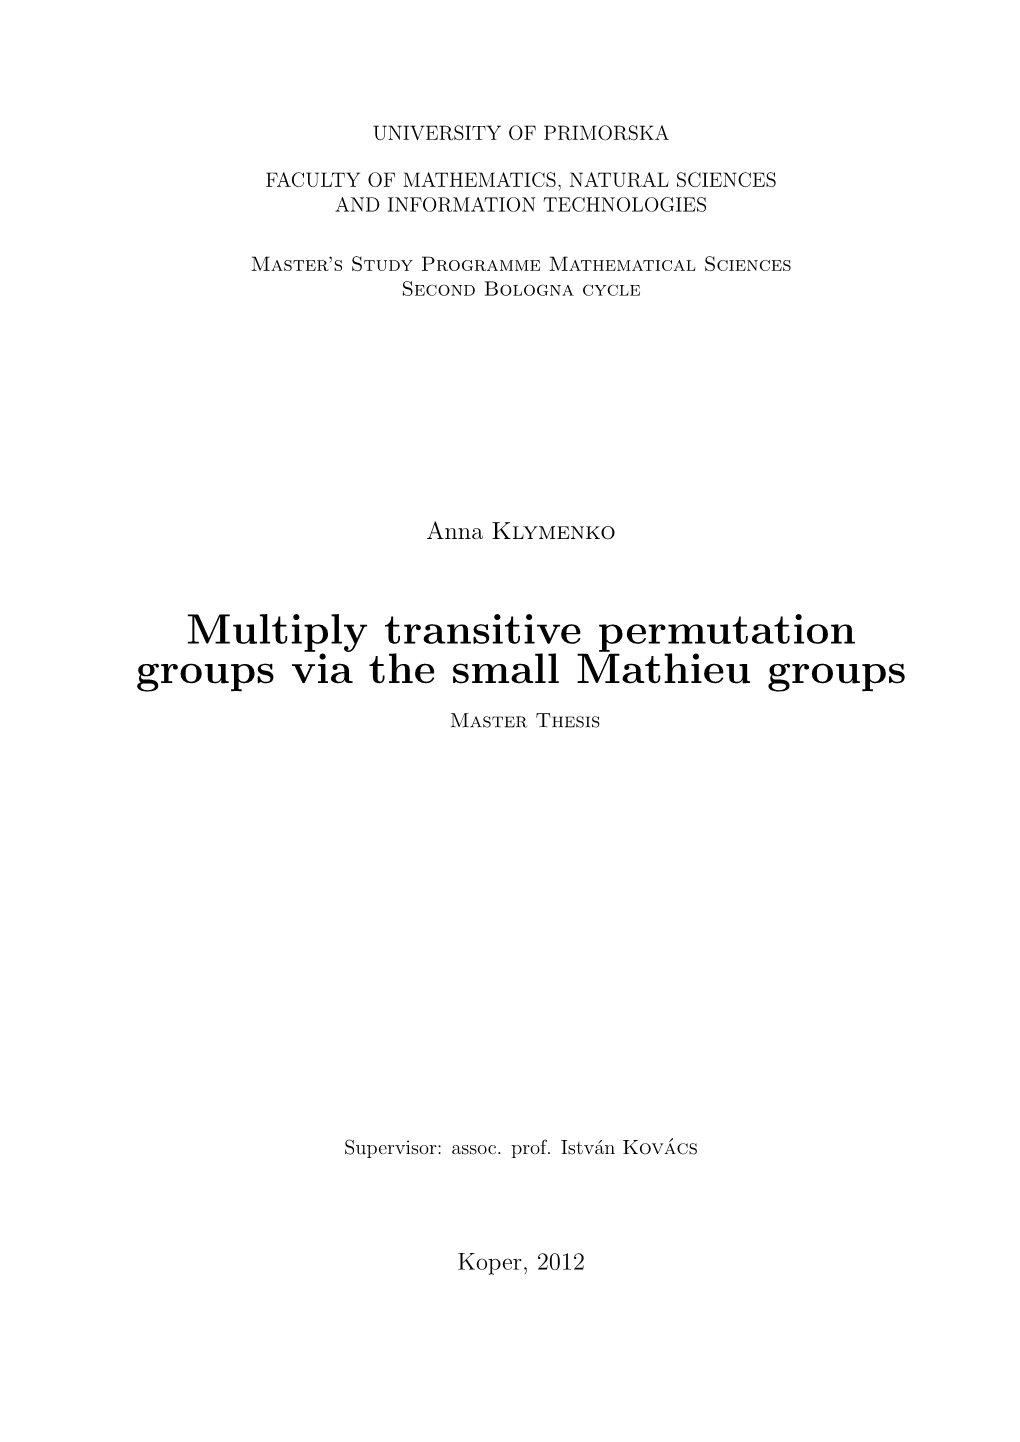 Multiply Transitive Permutation Groups Via the Small Mathieu Groups